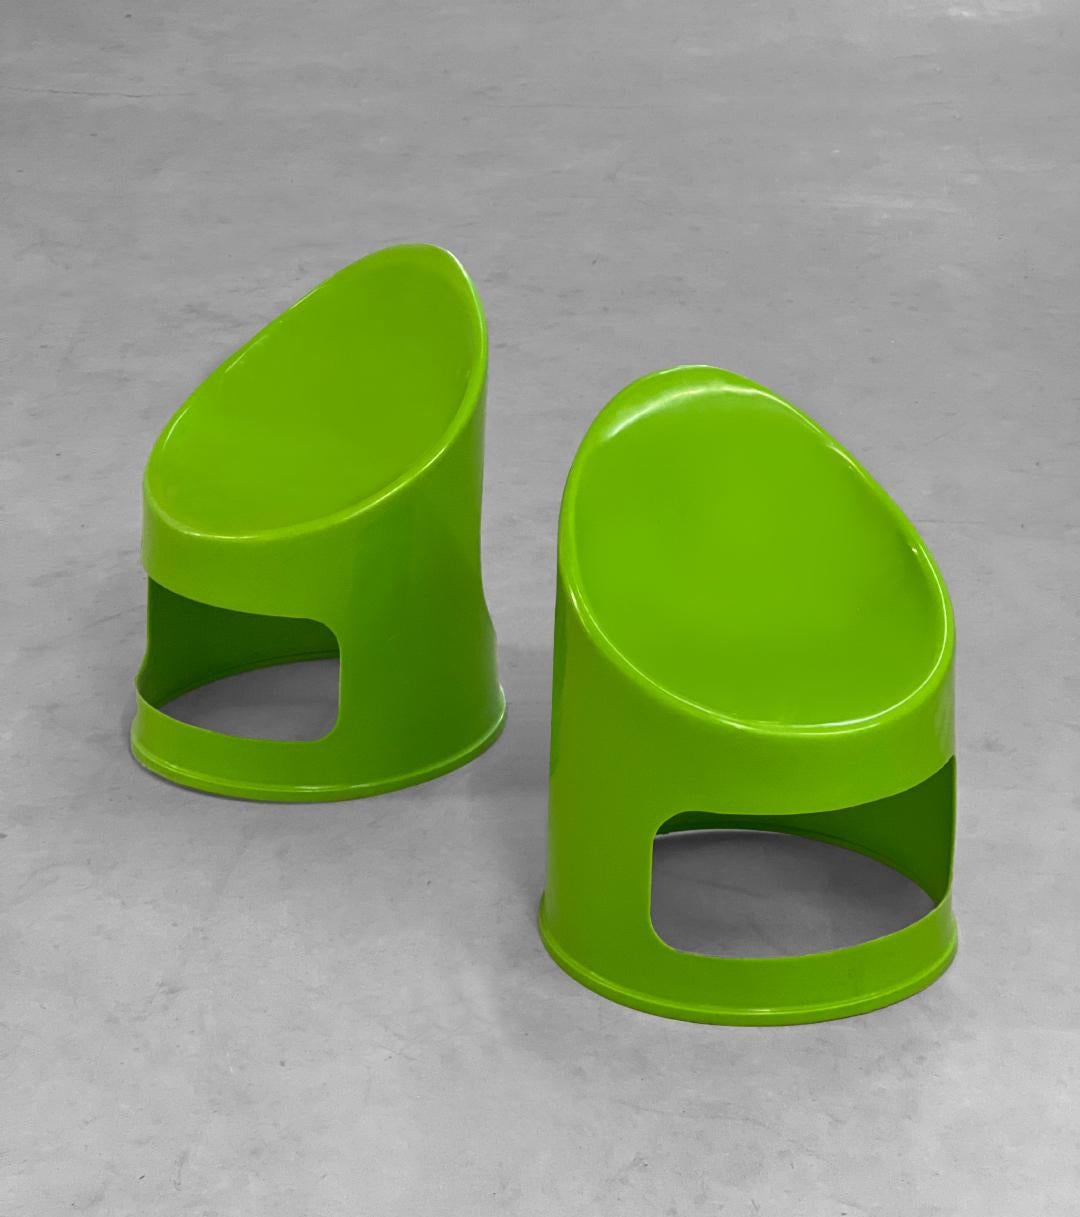 Great little pair of green 1970's molded children's chairs. Modern design that adds a nice pop of color to the space. In excellent condition.